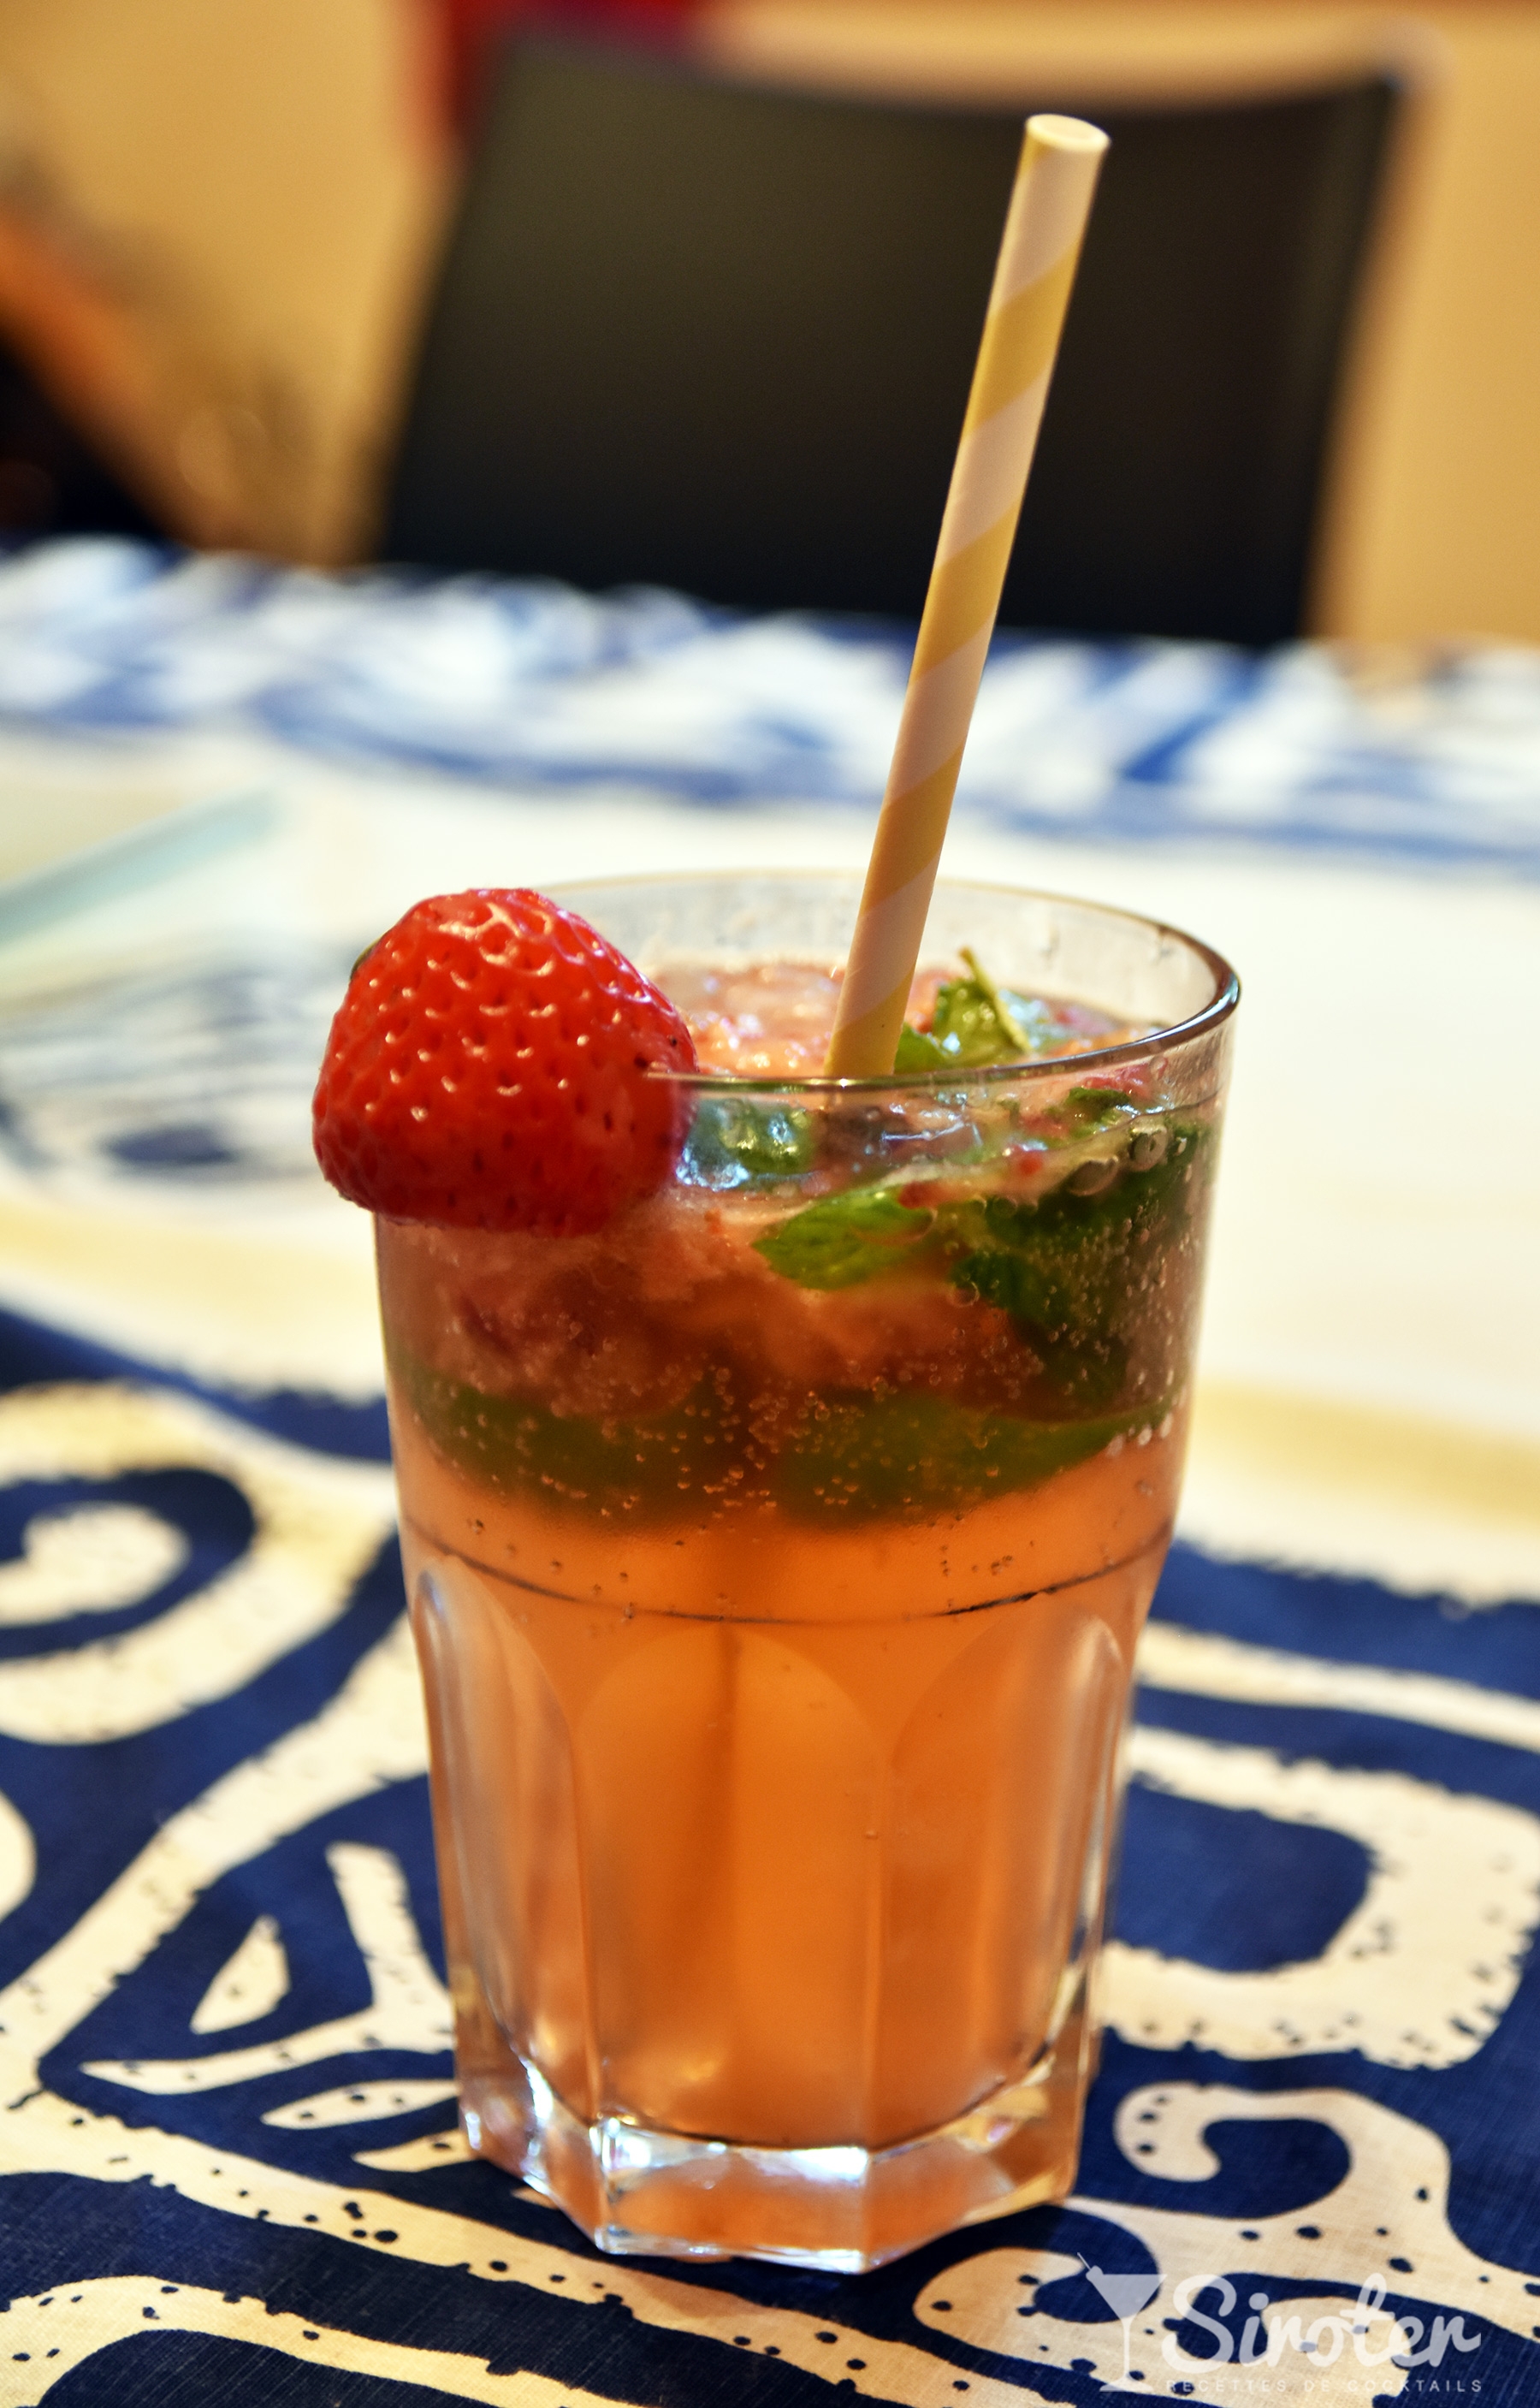 Mojito Fraise Cocktail Recipe Instructions And Reviews